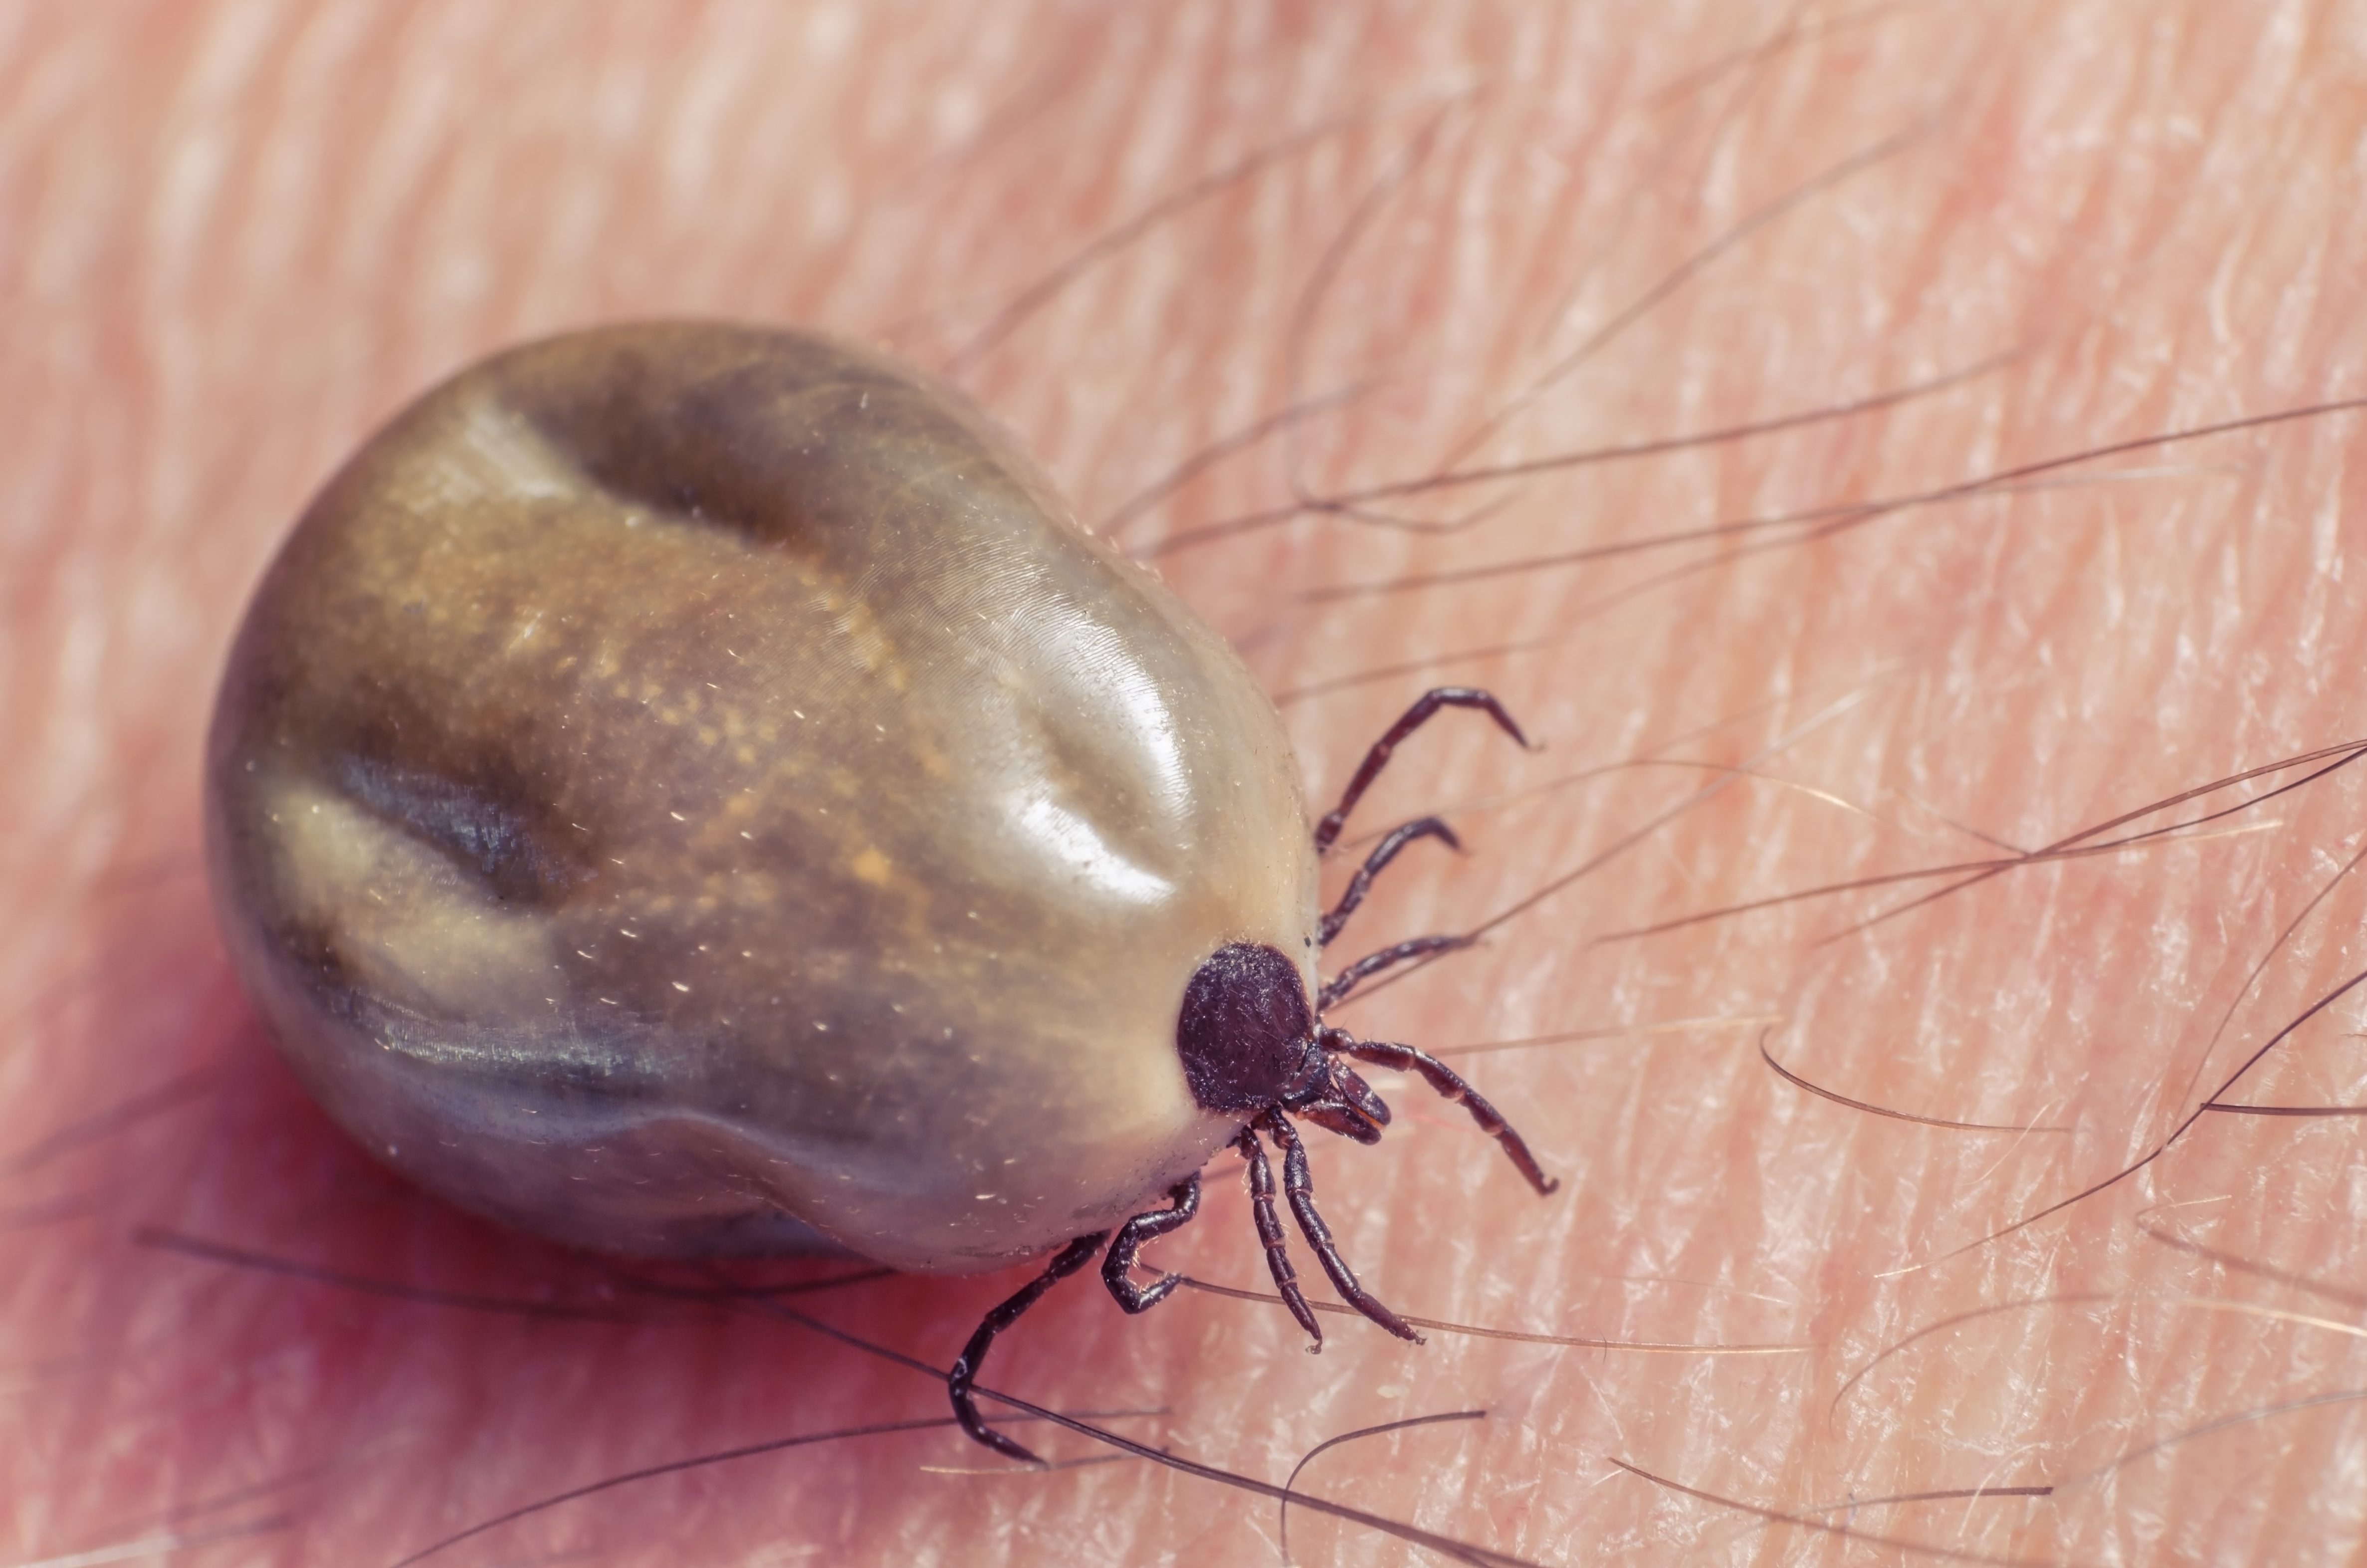 It’s important to learn more about tick hot spots so you can take extra precautions to avoid being infected.